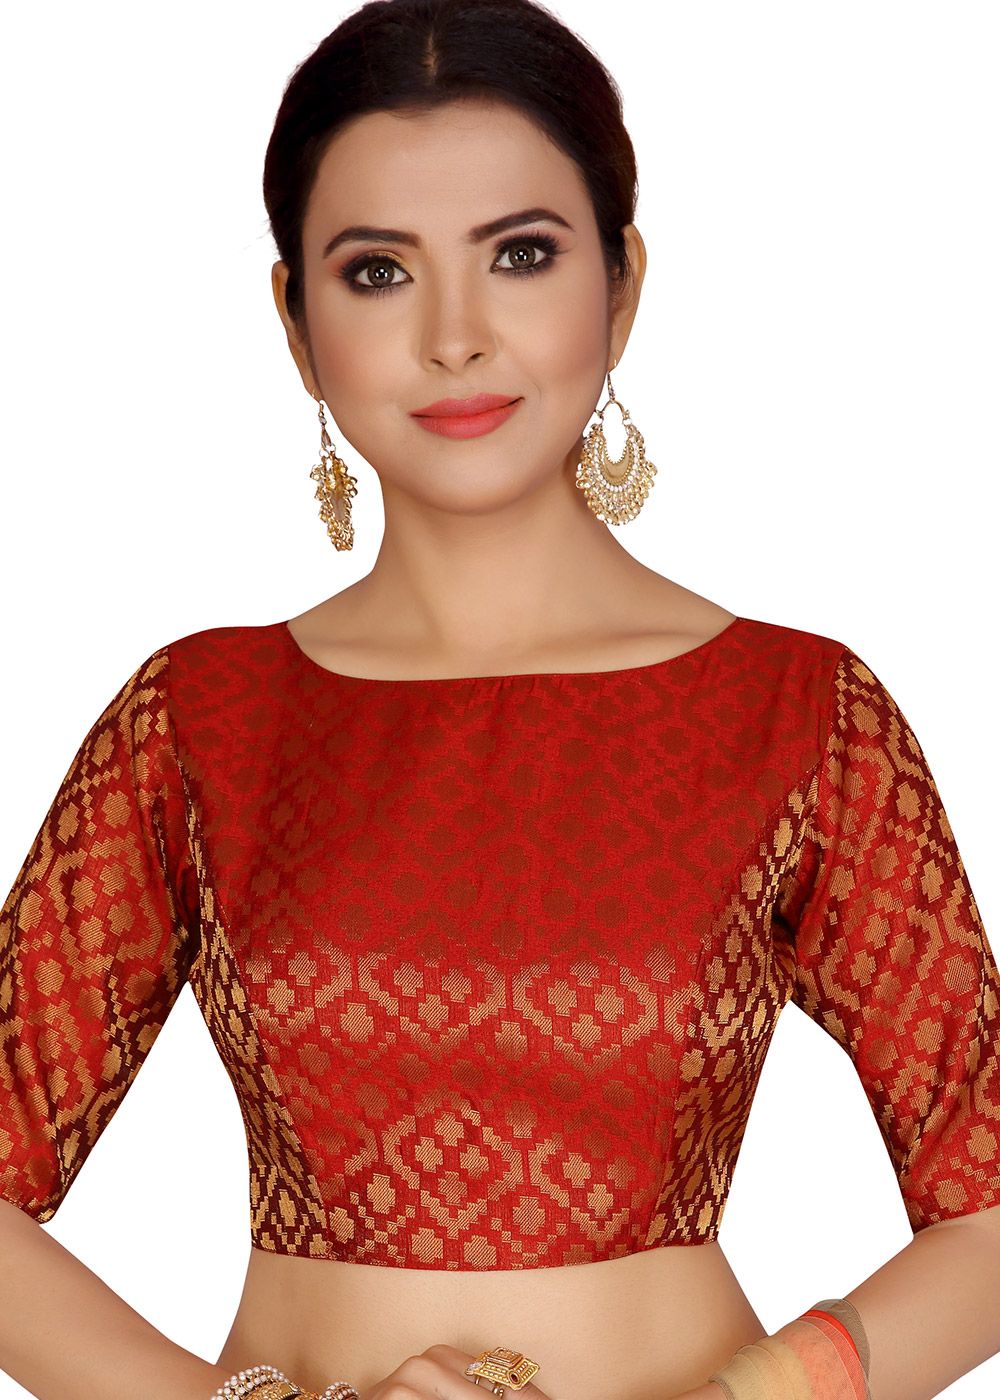 Buy Boat Neck Churidar Suits Online at affordable prices on  IndianClothStore.com